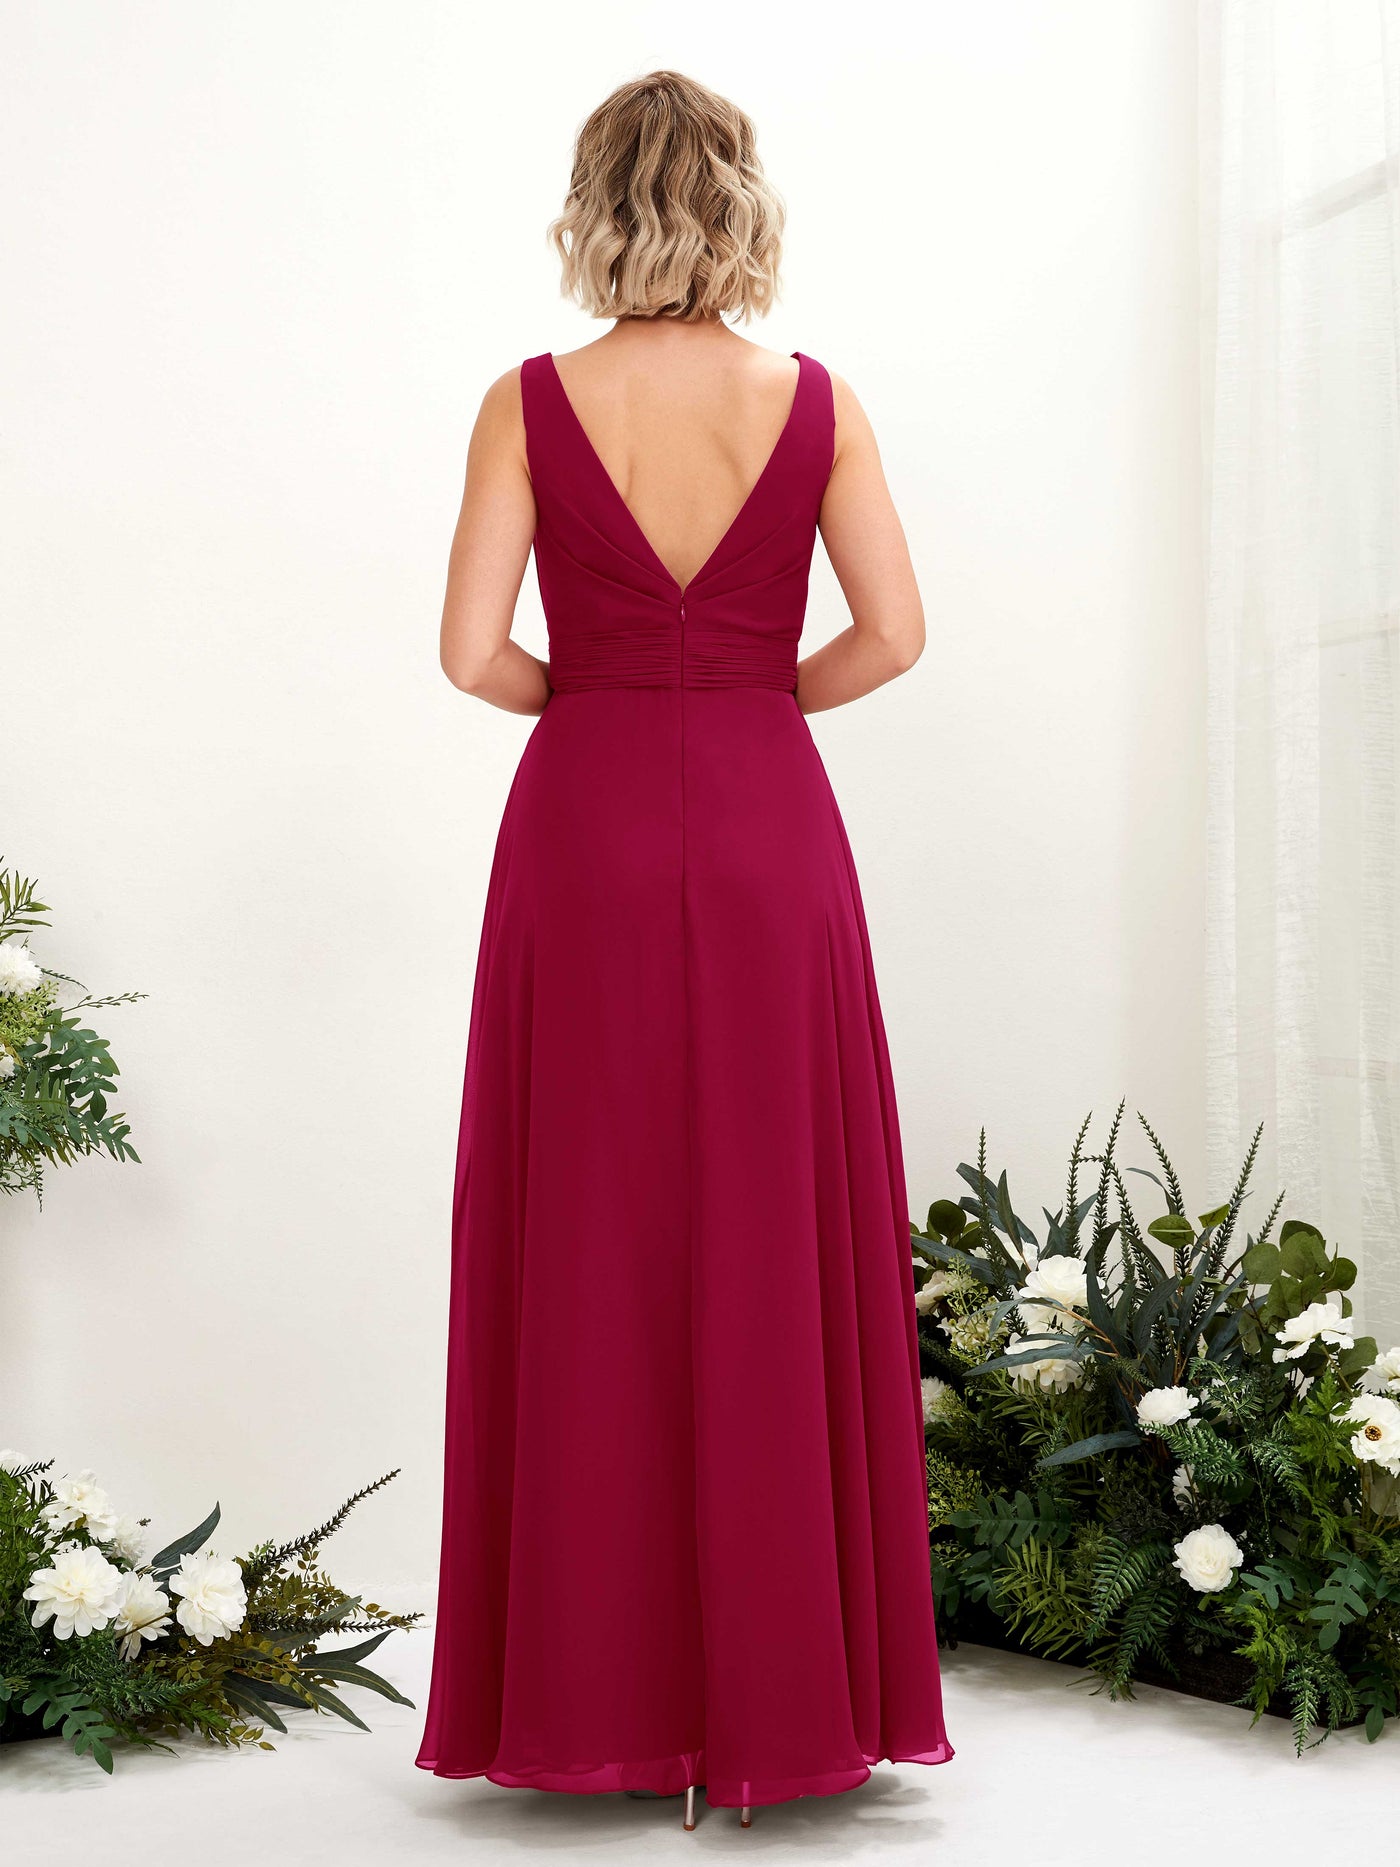 Jester Red Bridesmaid Dresses Bridesmaid Dress A-line Chiffon Bateau Full Length Sleeveless Wedding Party Dress (81225841)#color_jester-red